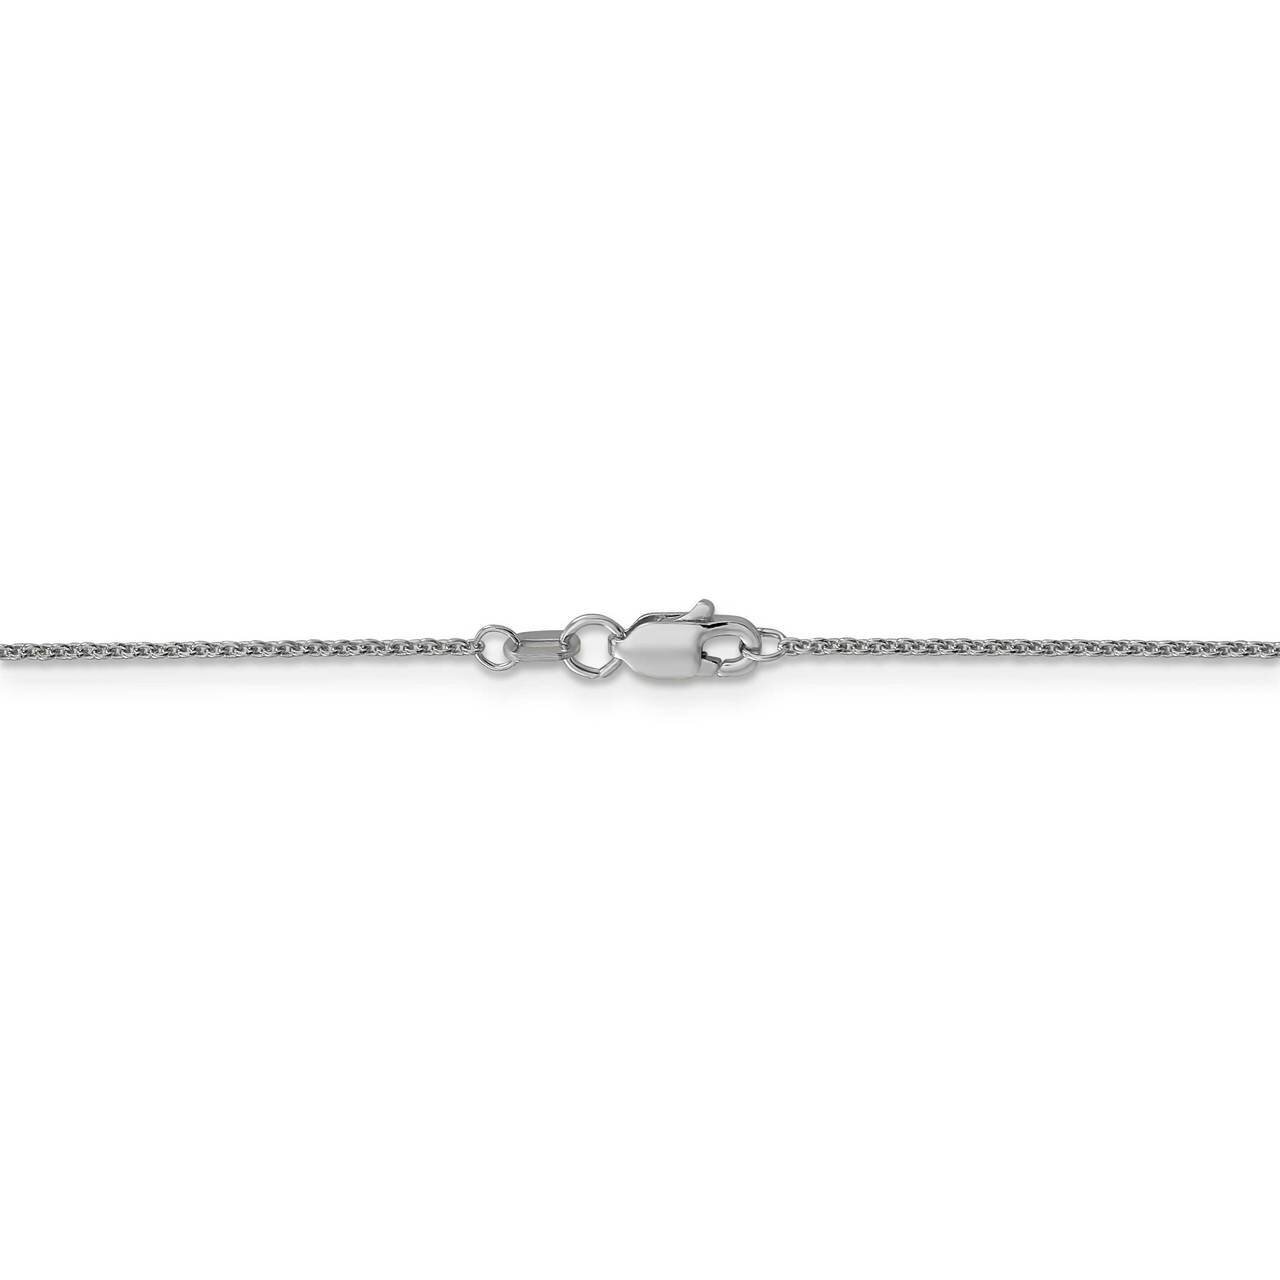 30 Inch 1mm Cable Chain 14k White Gold PEN74-30